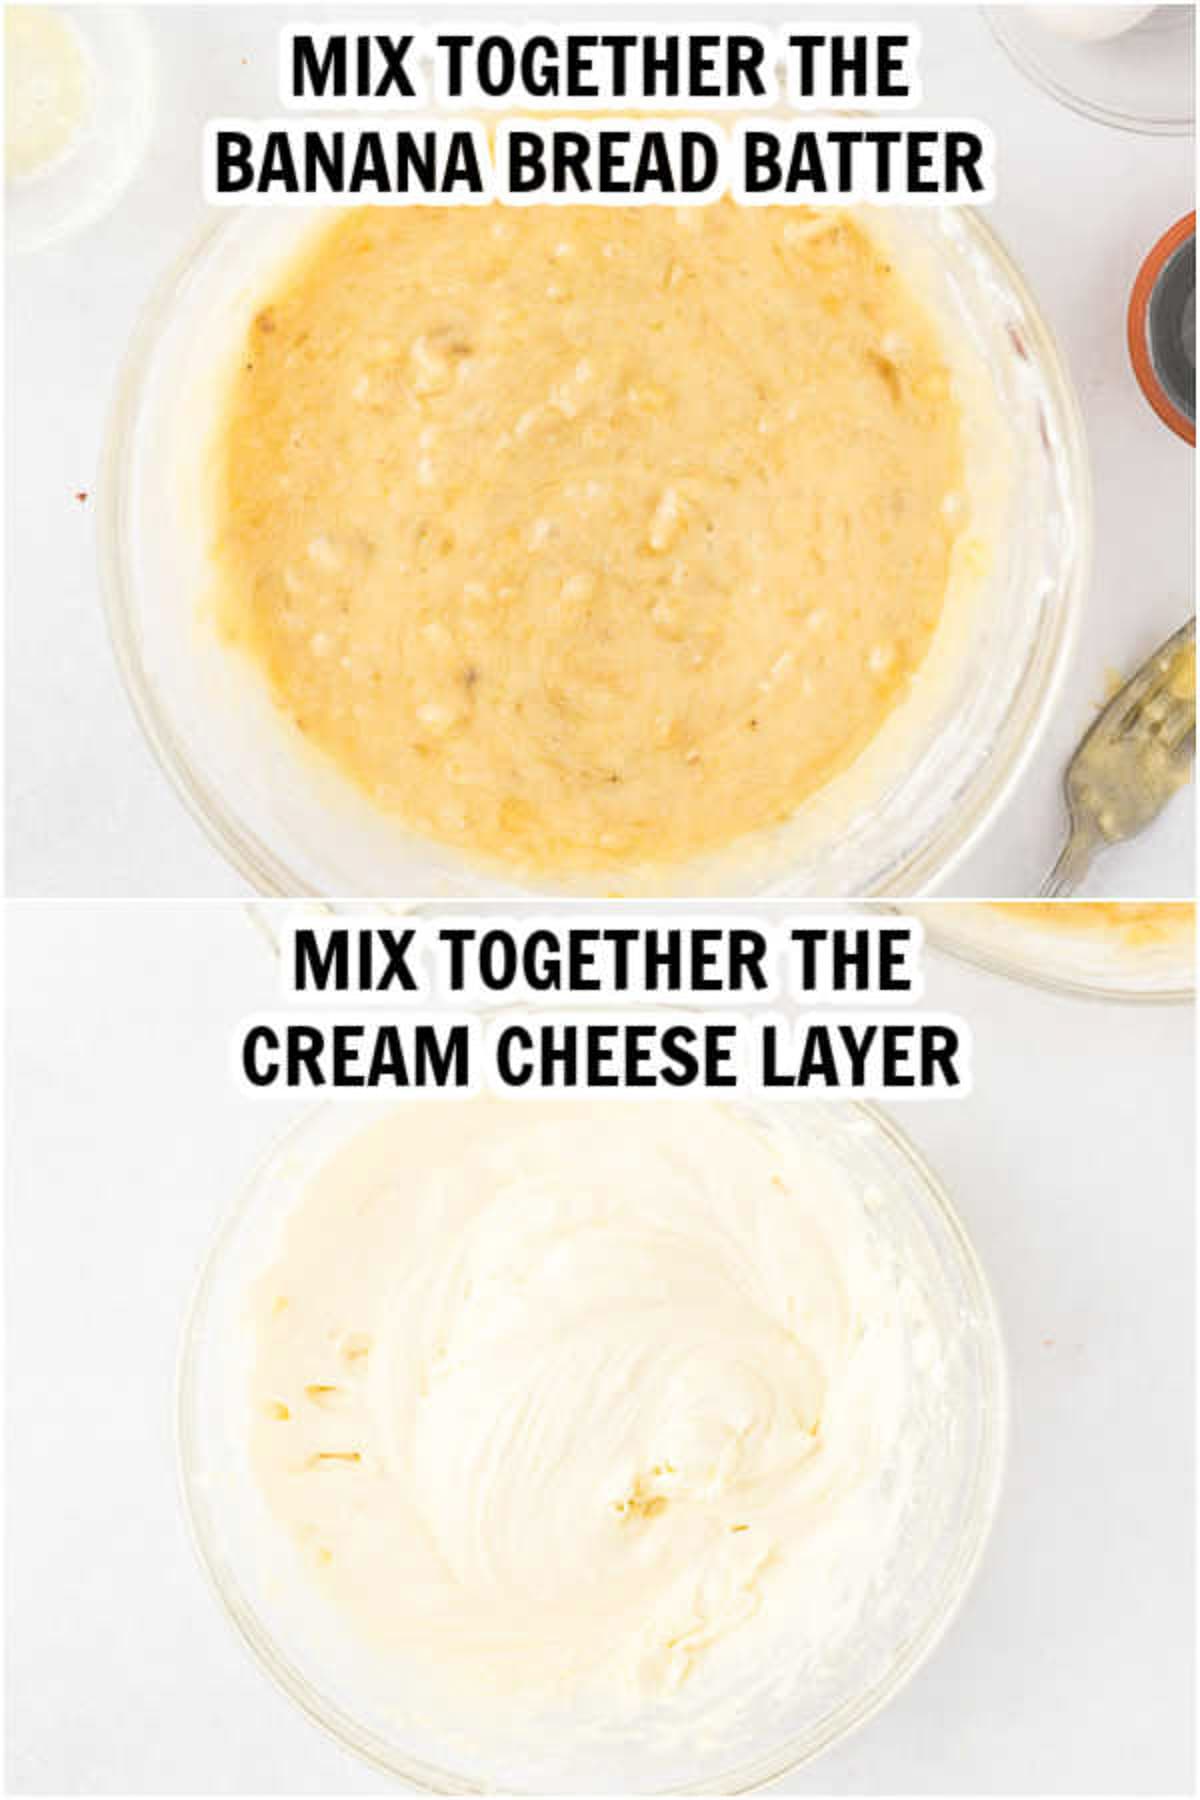 2 photos: mix together the banana bread batter and mix together the cream cheese layer. 